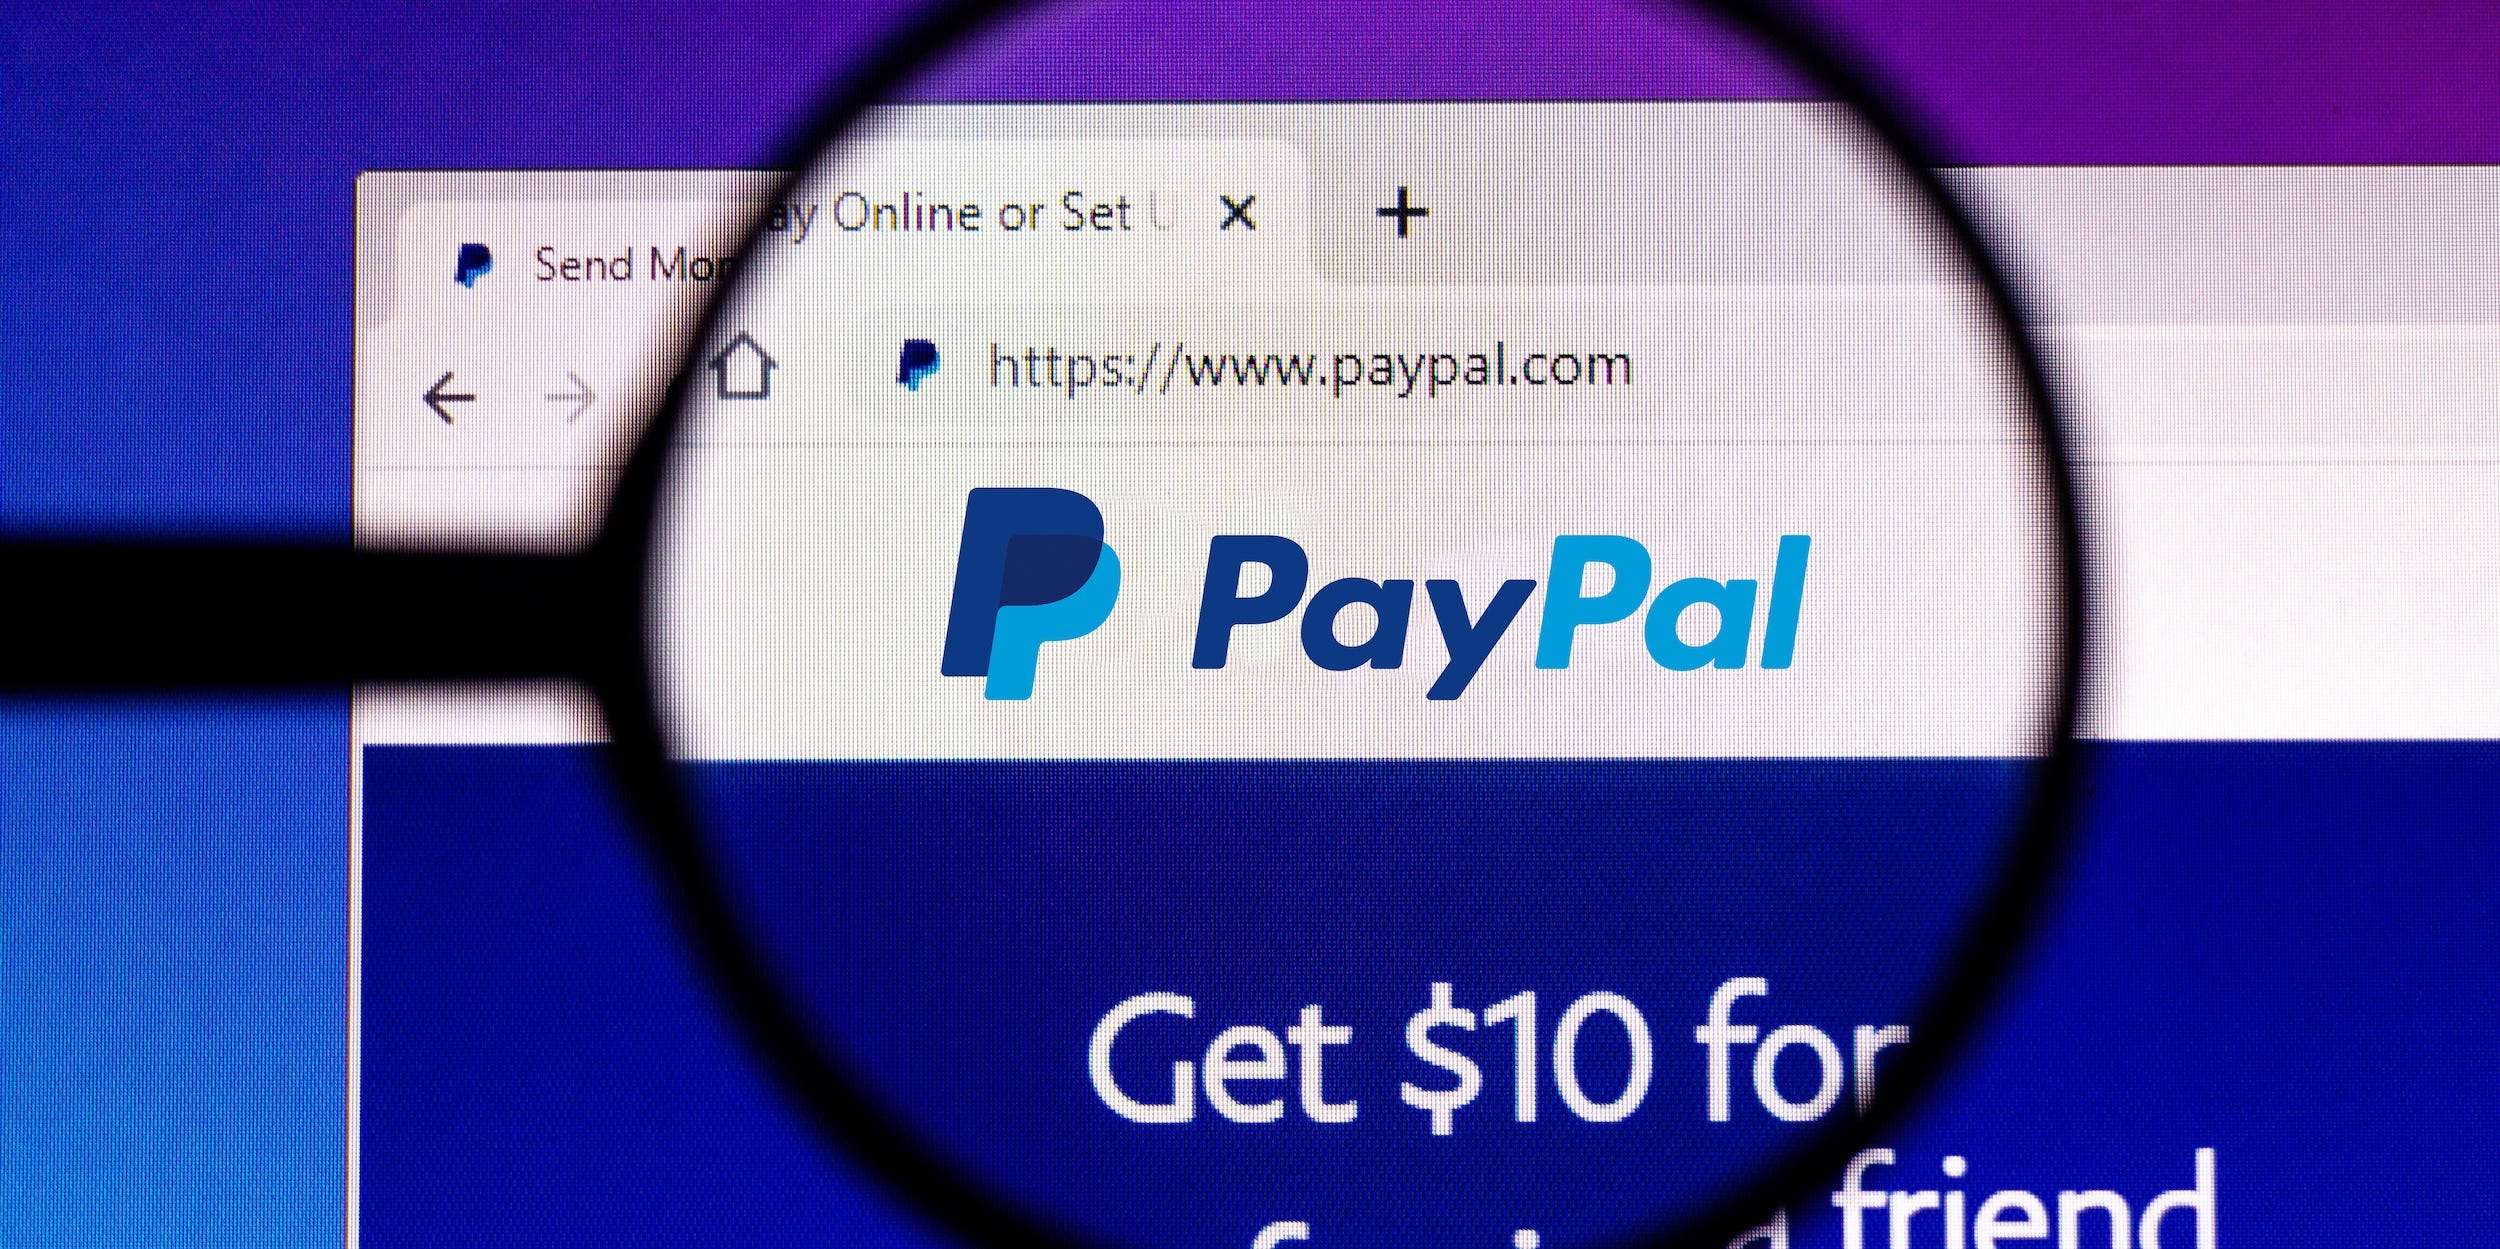 How to delete your PayPal account, whether it's for business or